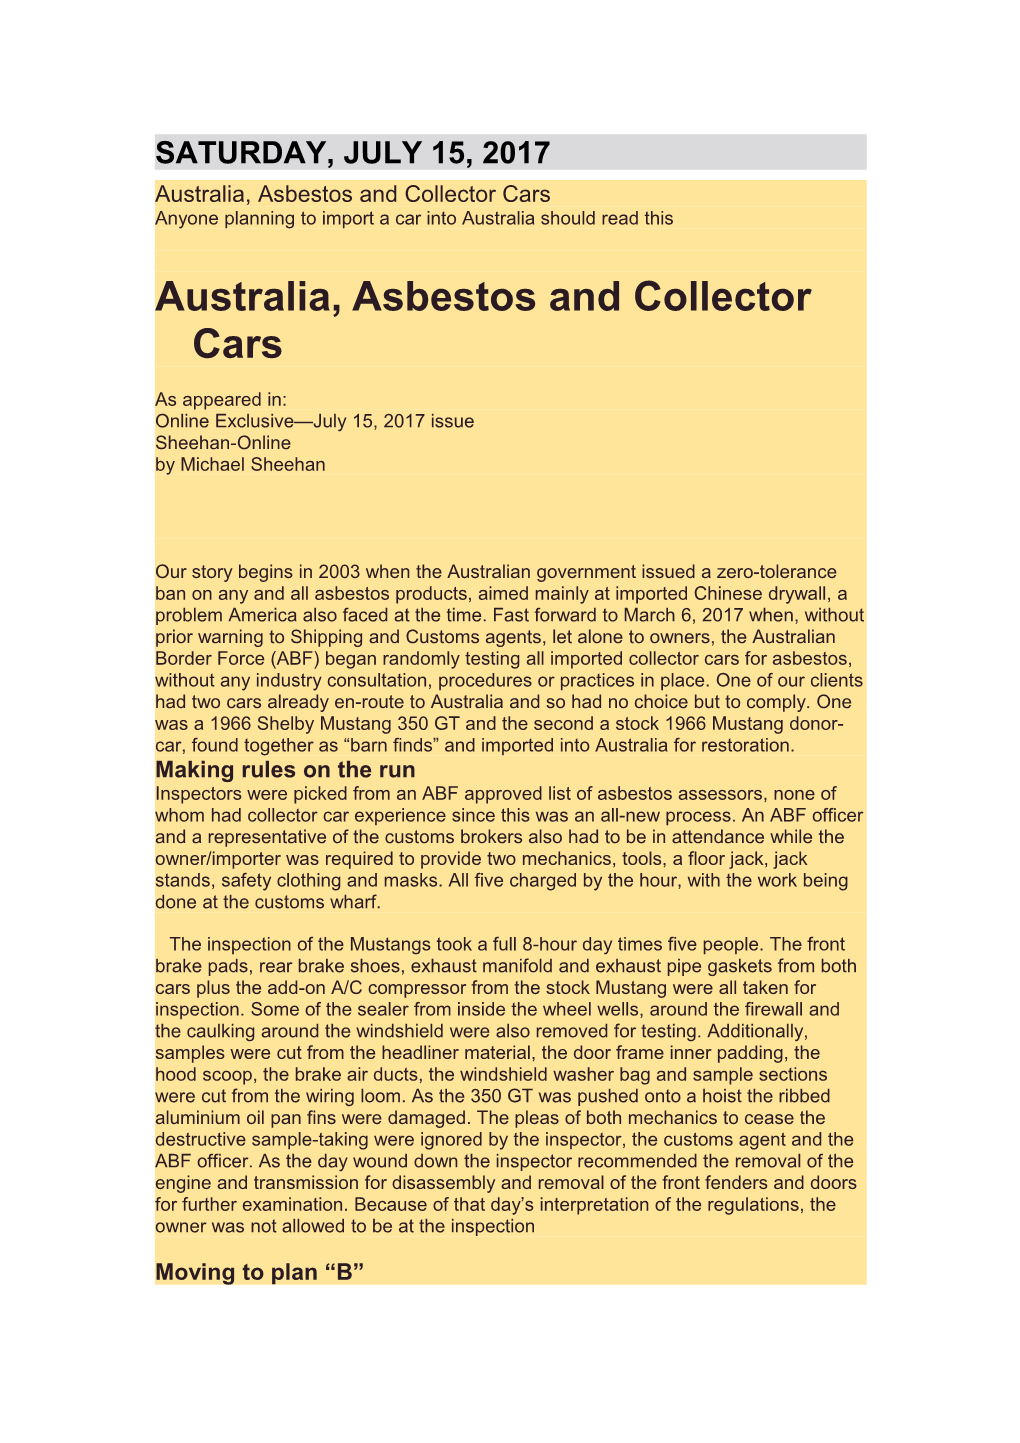 Australia, Asbestos and Collector Cars